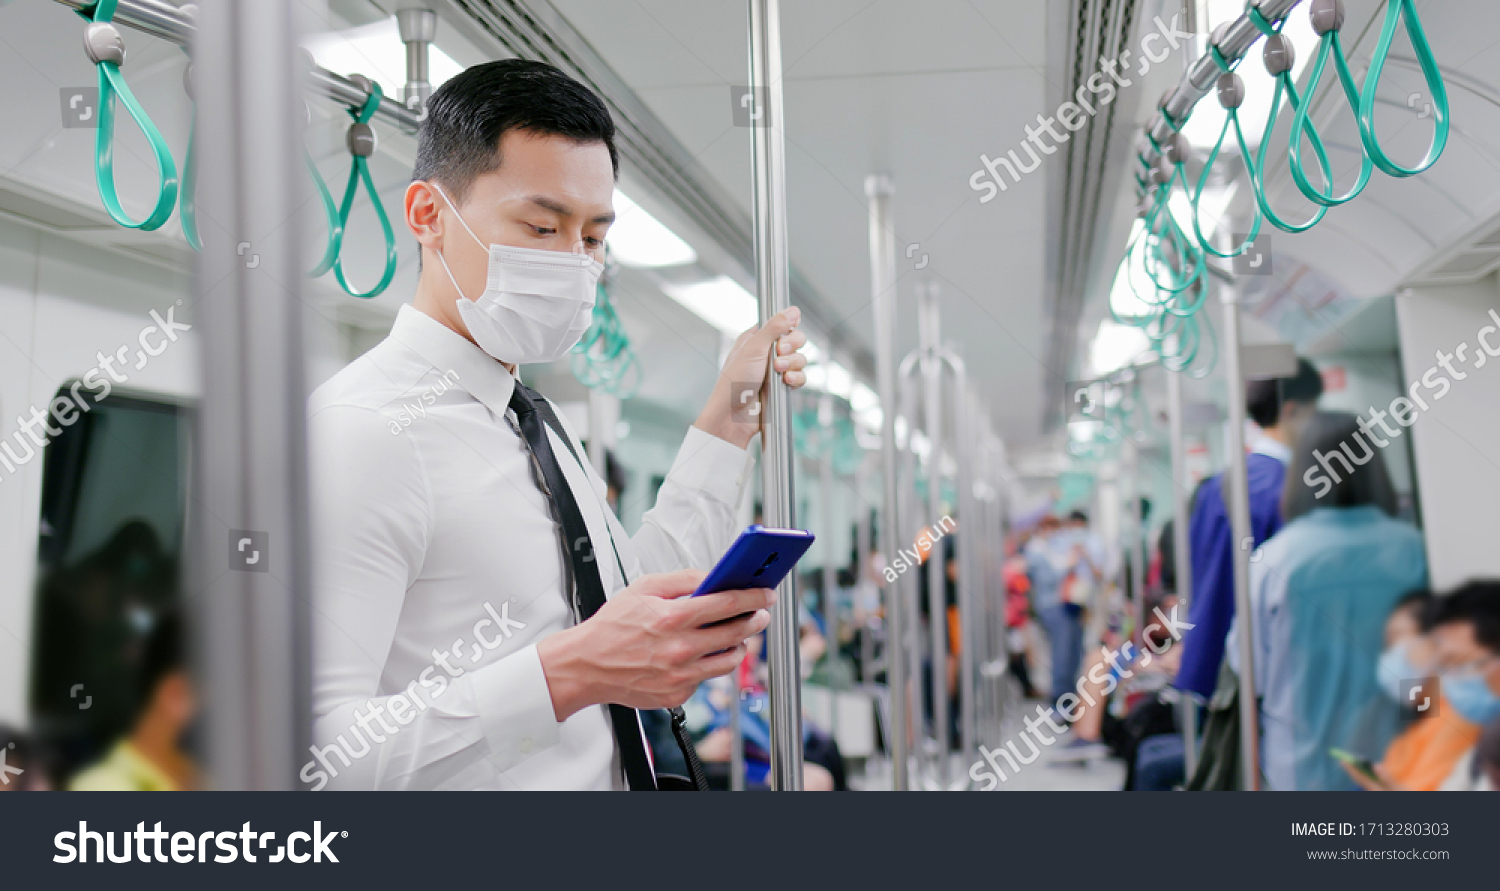 Asian business man with surgical mask face protection use a smartphone  and keep social distancing to crowd while commuting in the metro or train #1713280303